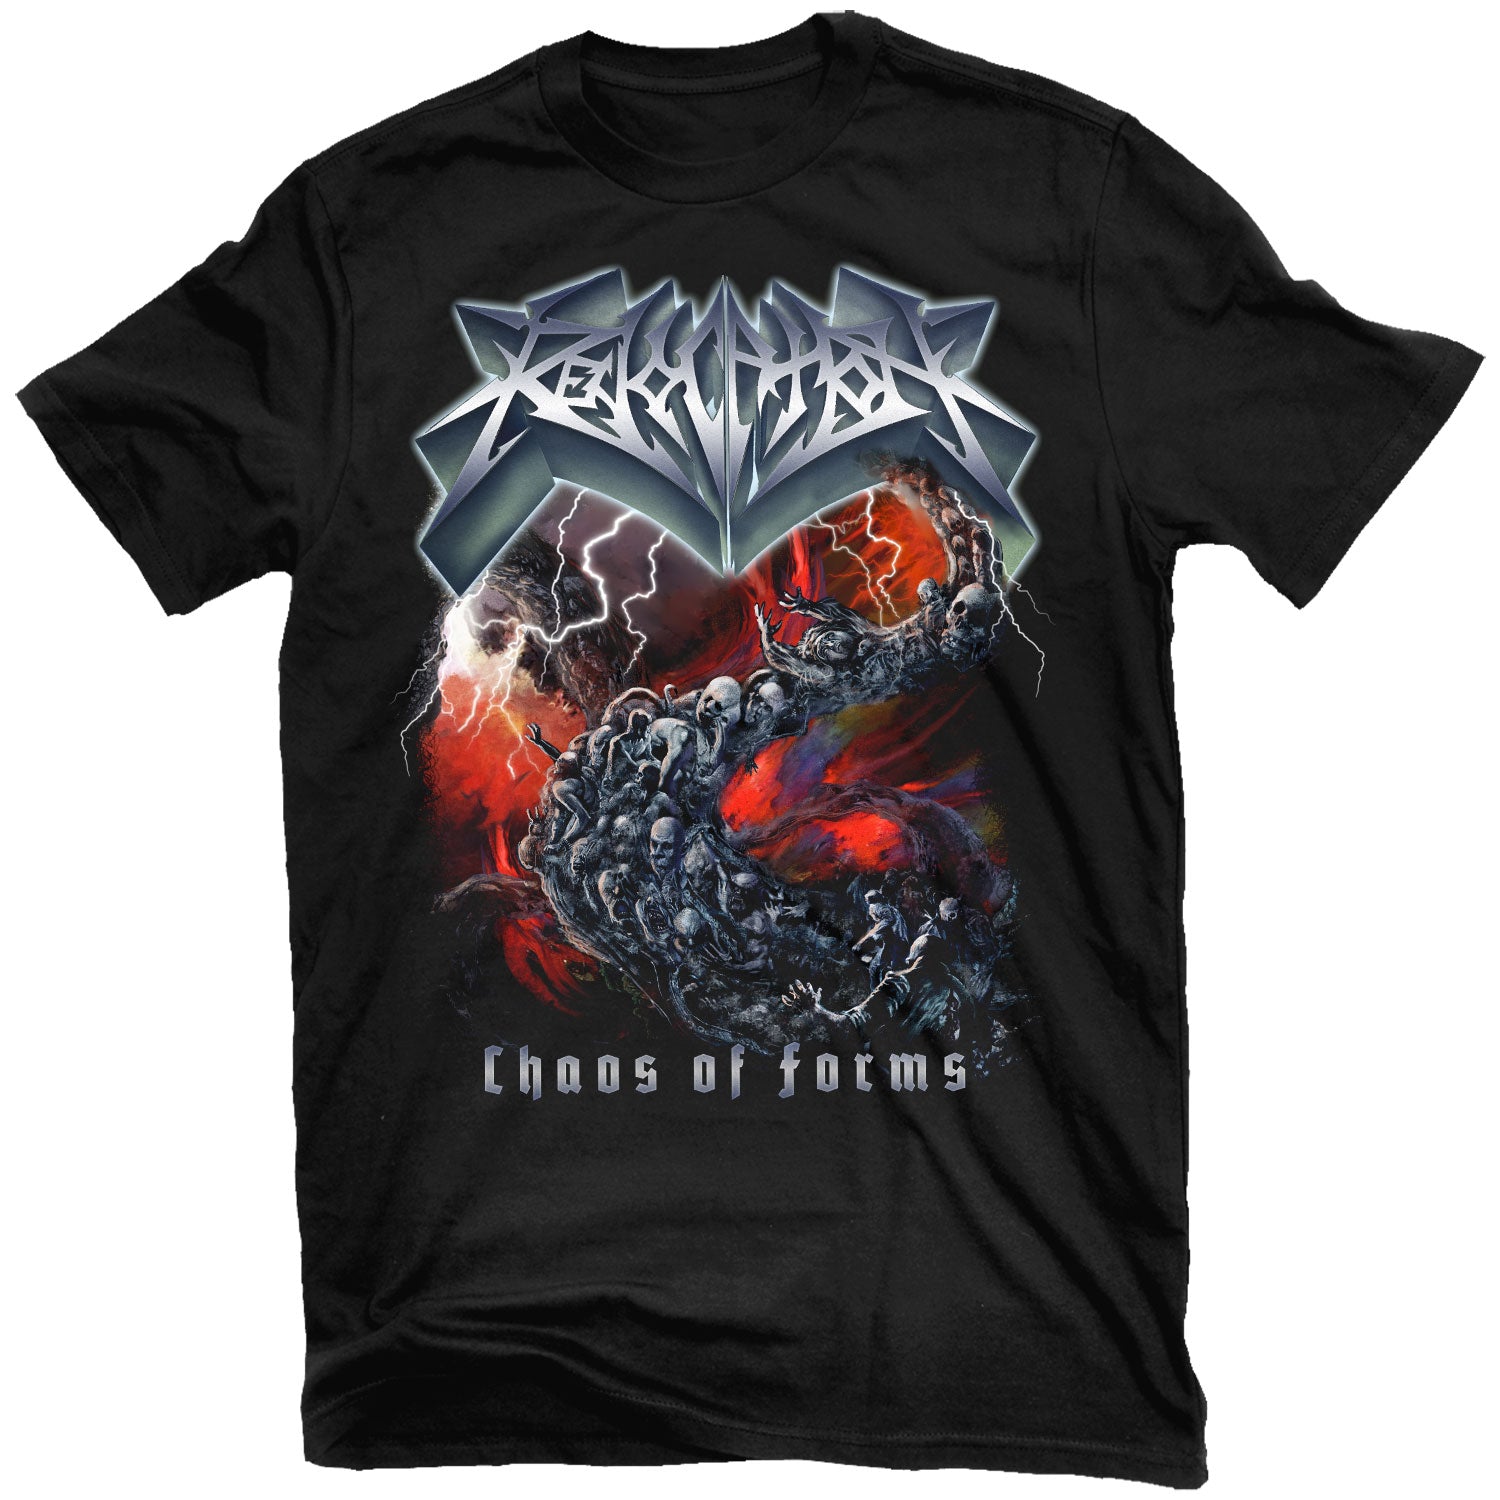 Revocation "Chaos of Forms" T-Shirt